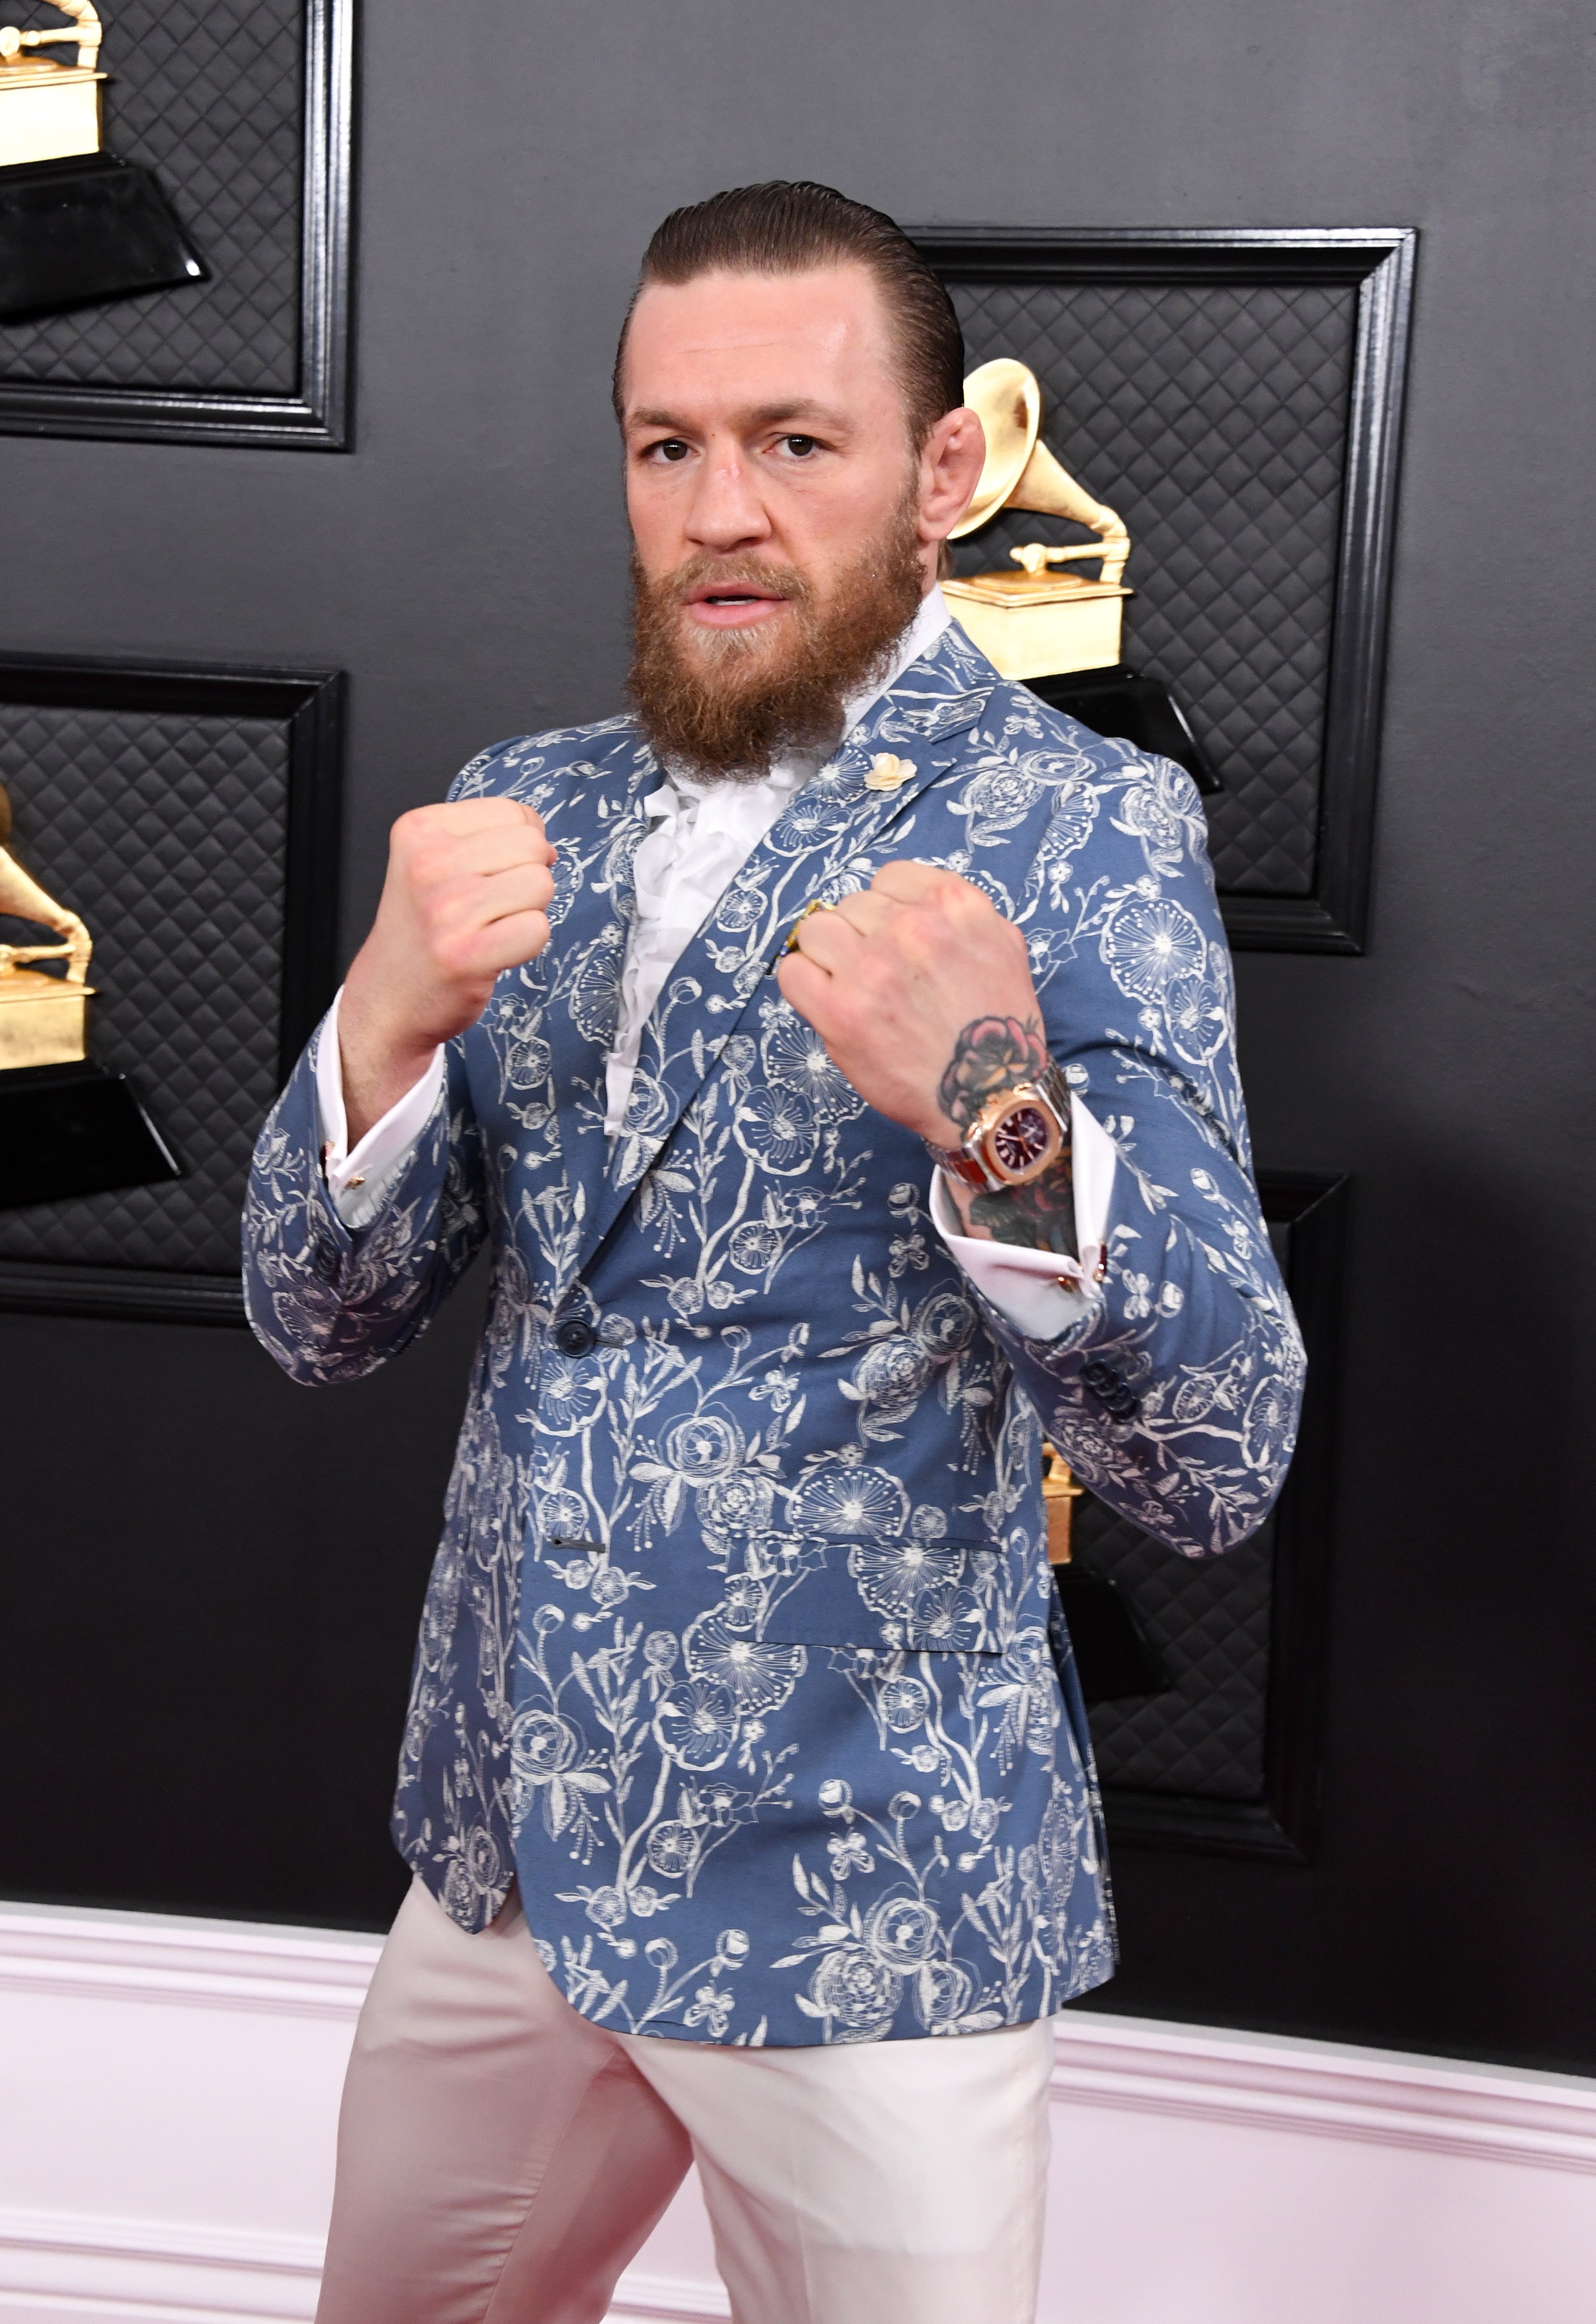 Conor McGregor attends the 62nd Annual GRAMMY Awards on January 26, 2020, in Los Angeles, California. | Source: Getty Images.